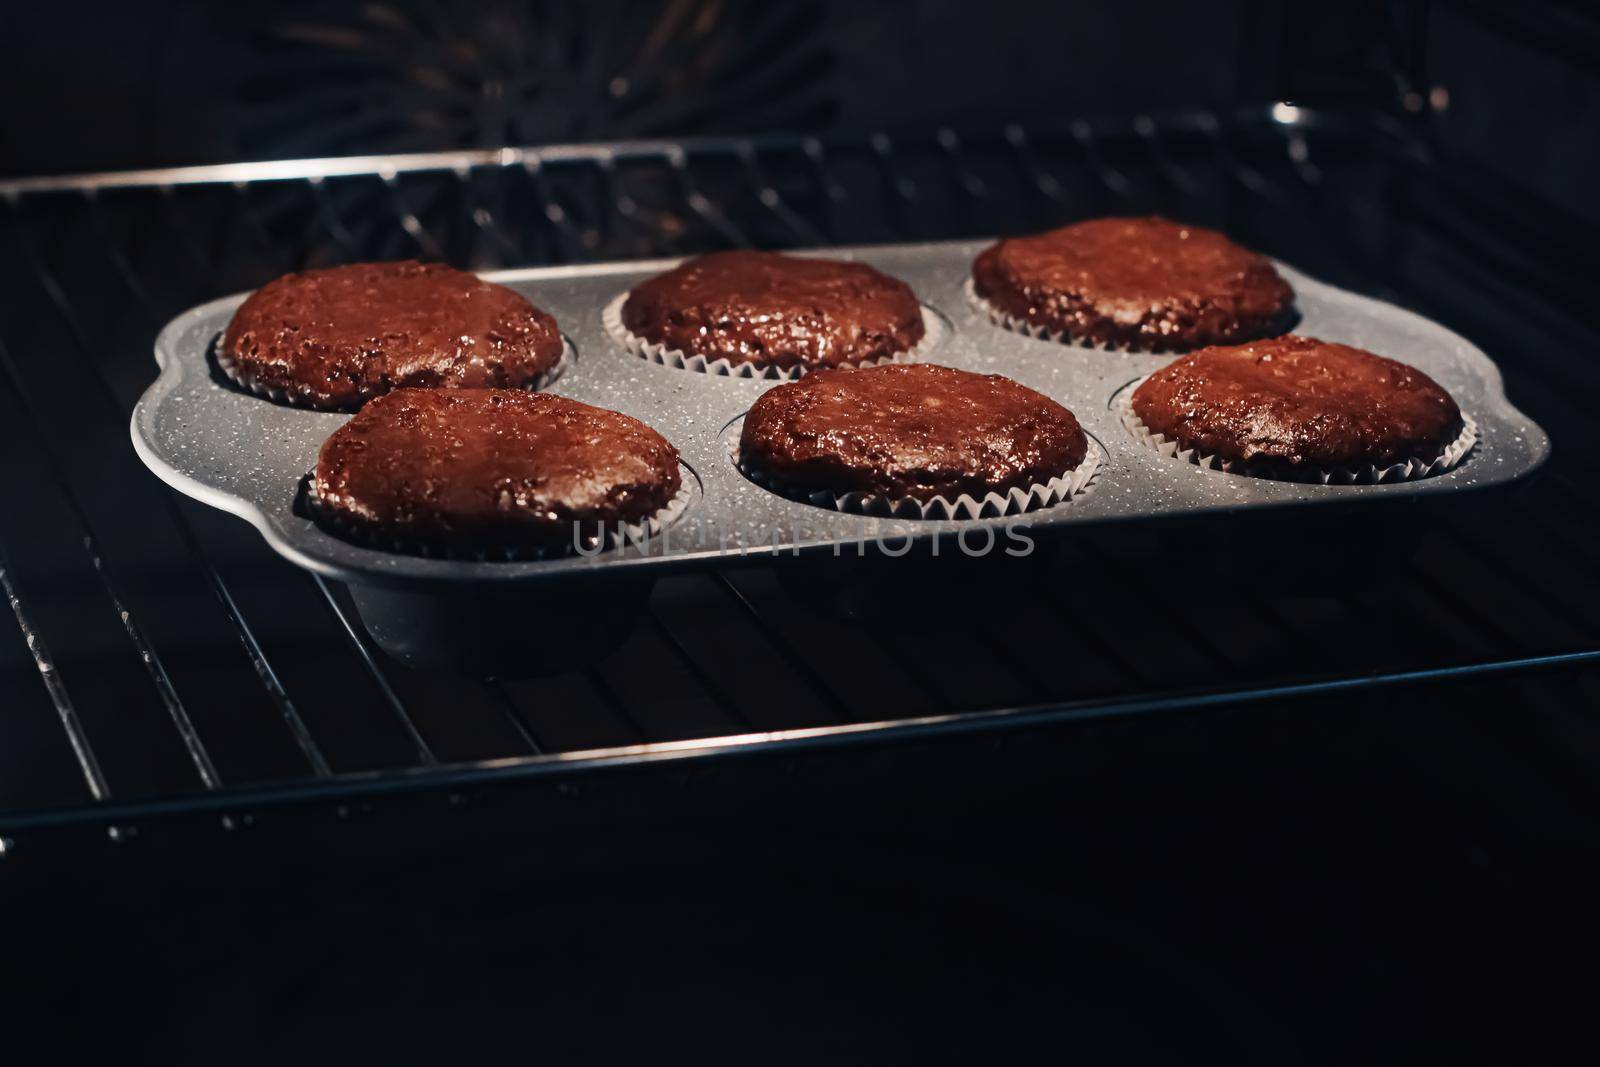 Chocolate muffins baking in the oven, homemade comfort food recipe by Anneleven